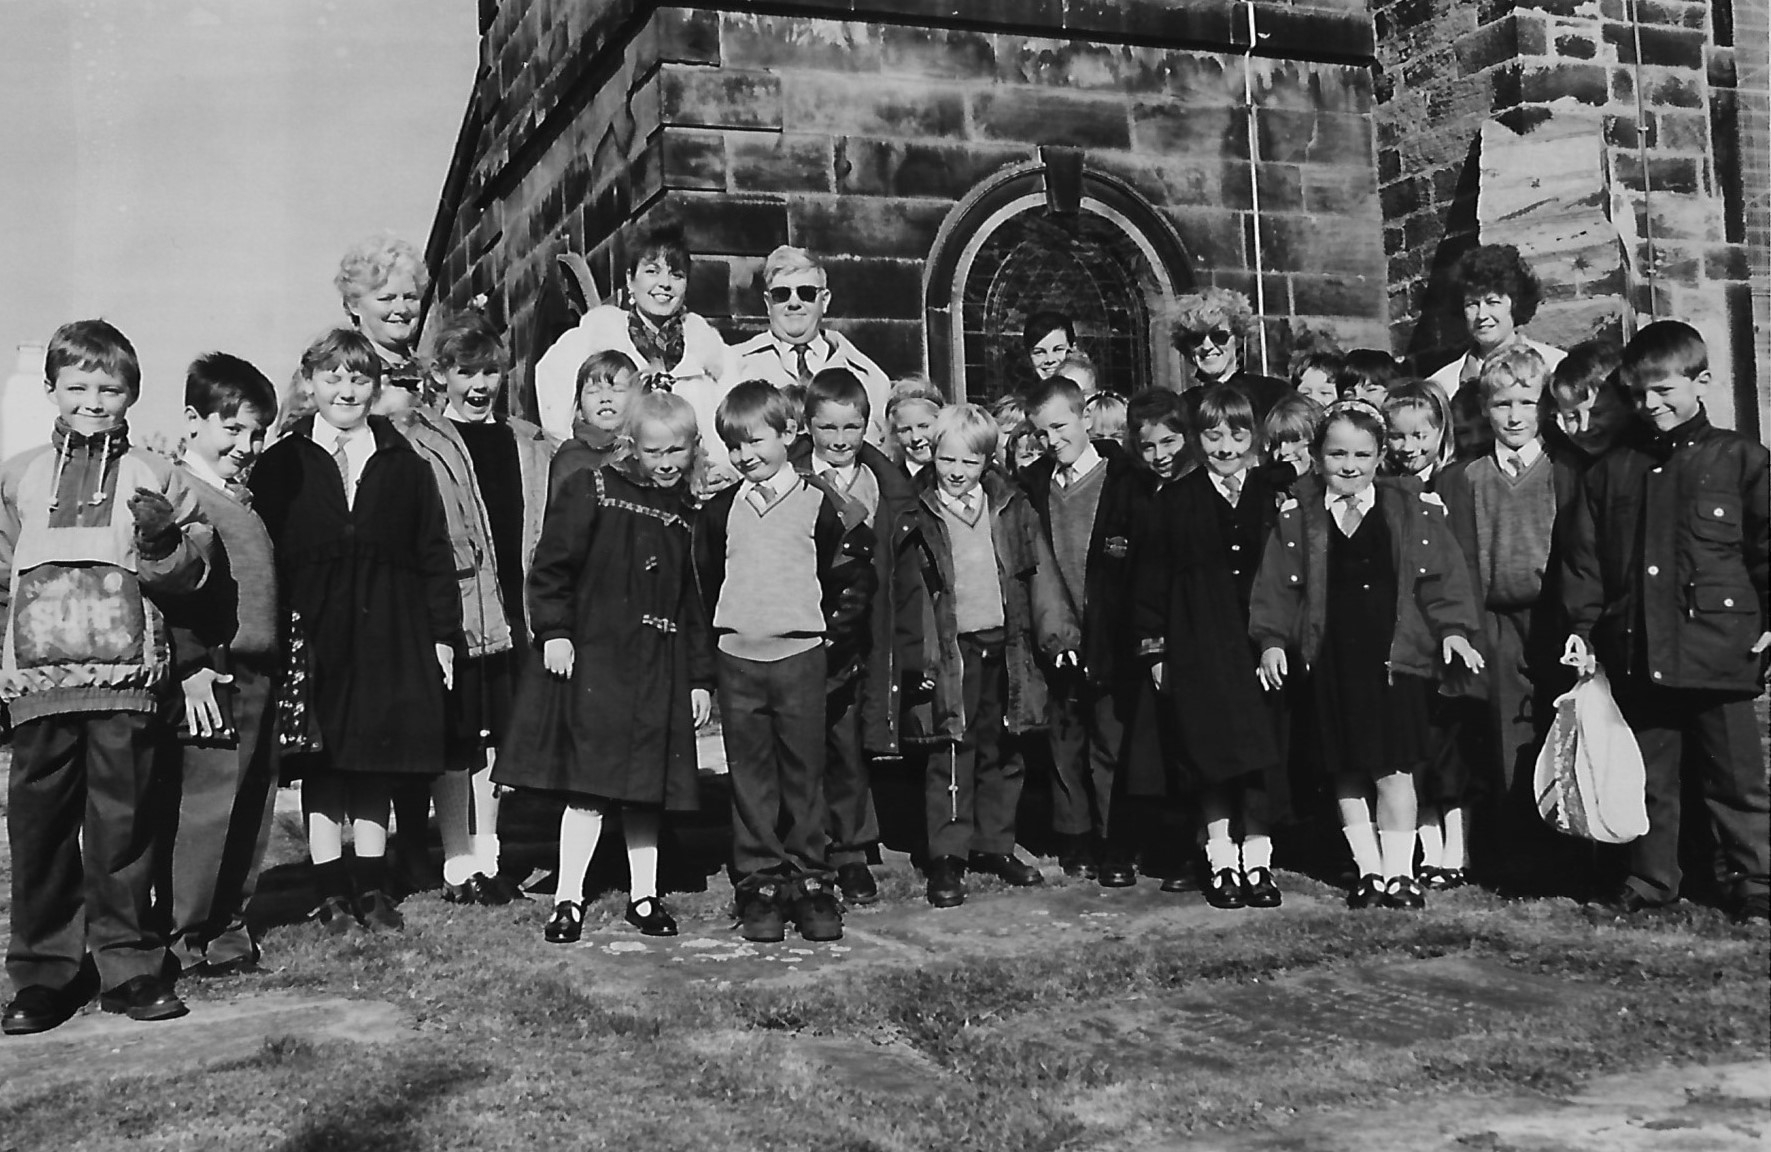 Southport in November 1994. Youngsters enjoy a walk at St Cuthbert's Church in Churchtown in Southport